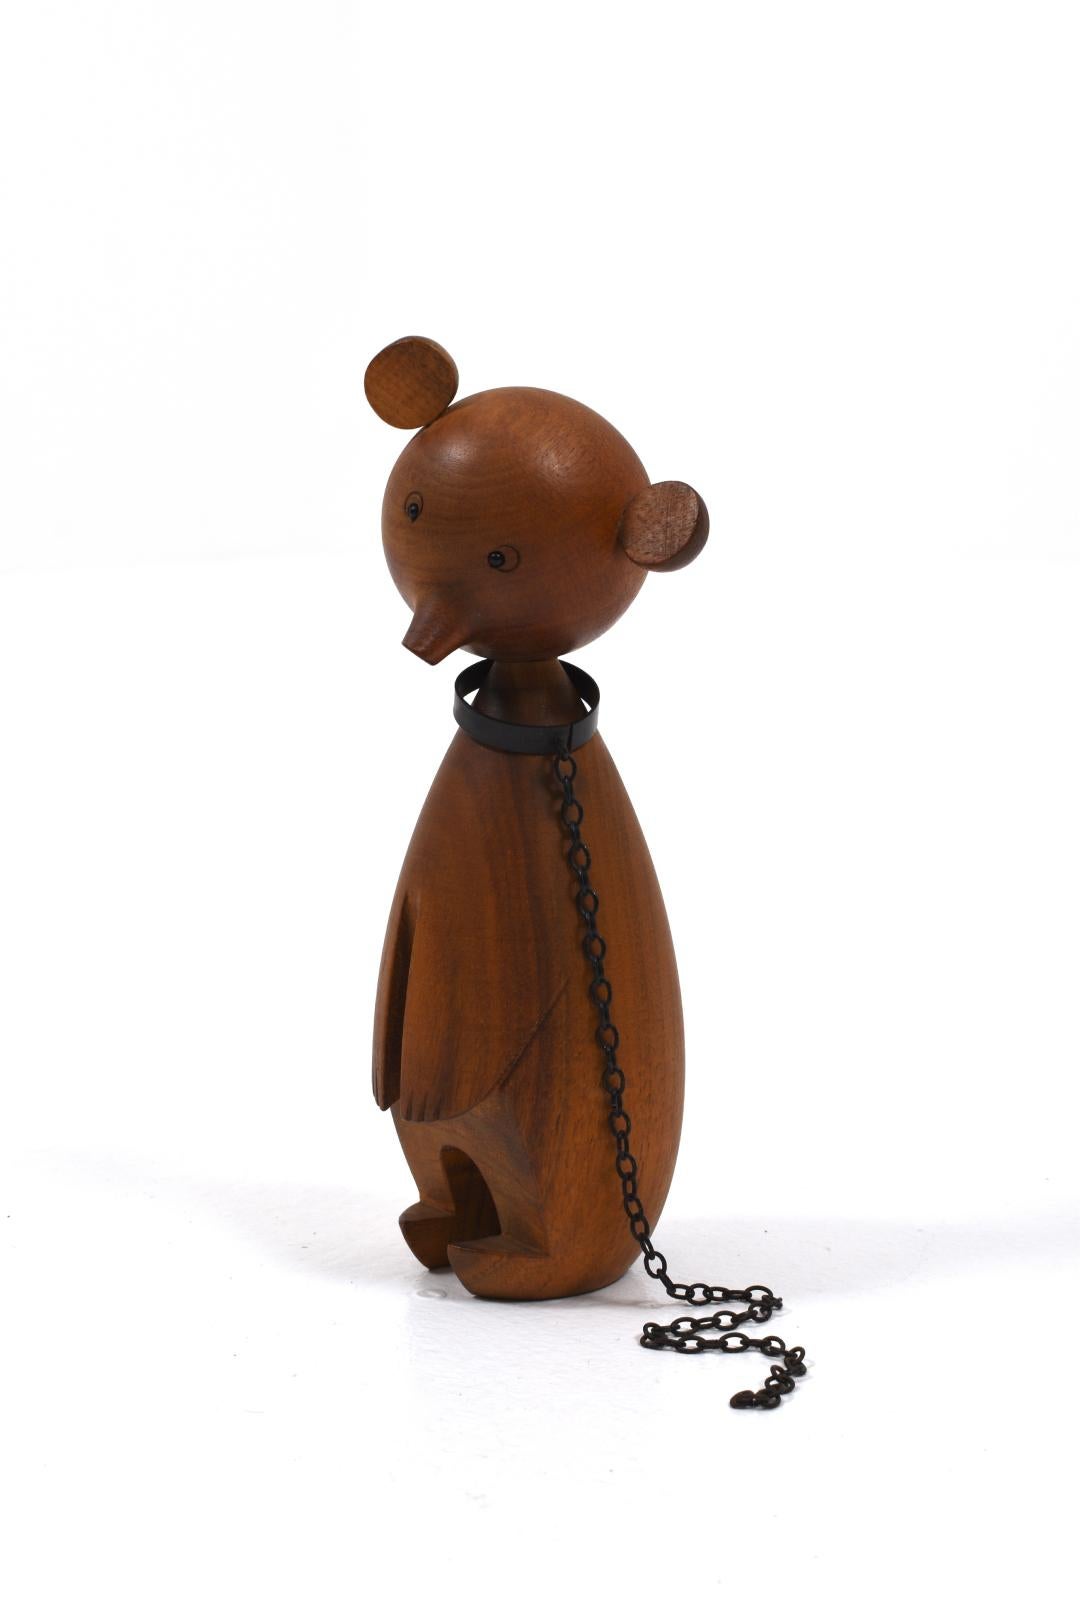 The Austrian Midcentury Walnut Bear by Werkstätte Hagenauer is a charming and unique decorative piece that captures the essence of mid-century modern design. Handcrafted by the esteemed Werkstätte Hagenauer, a prominent Viennese workshop known for